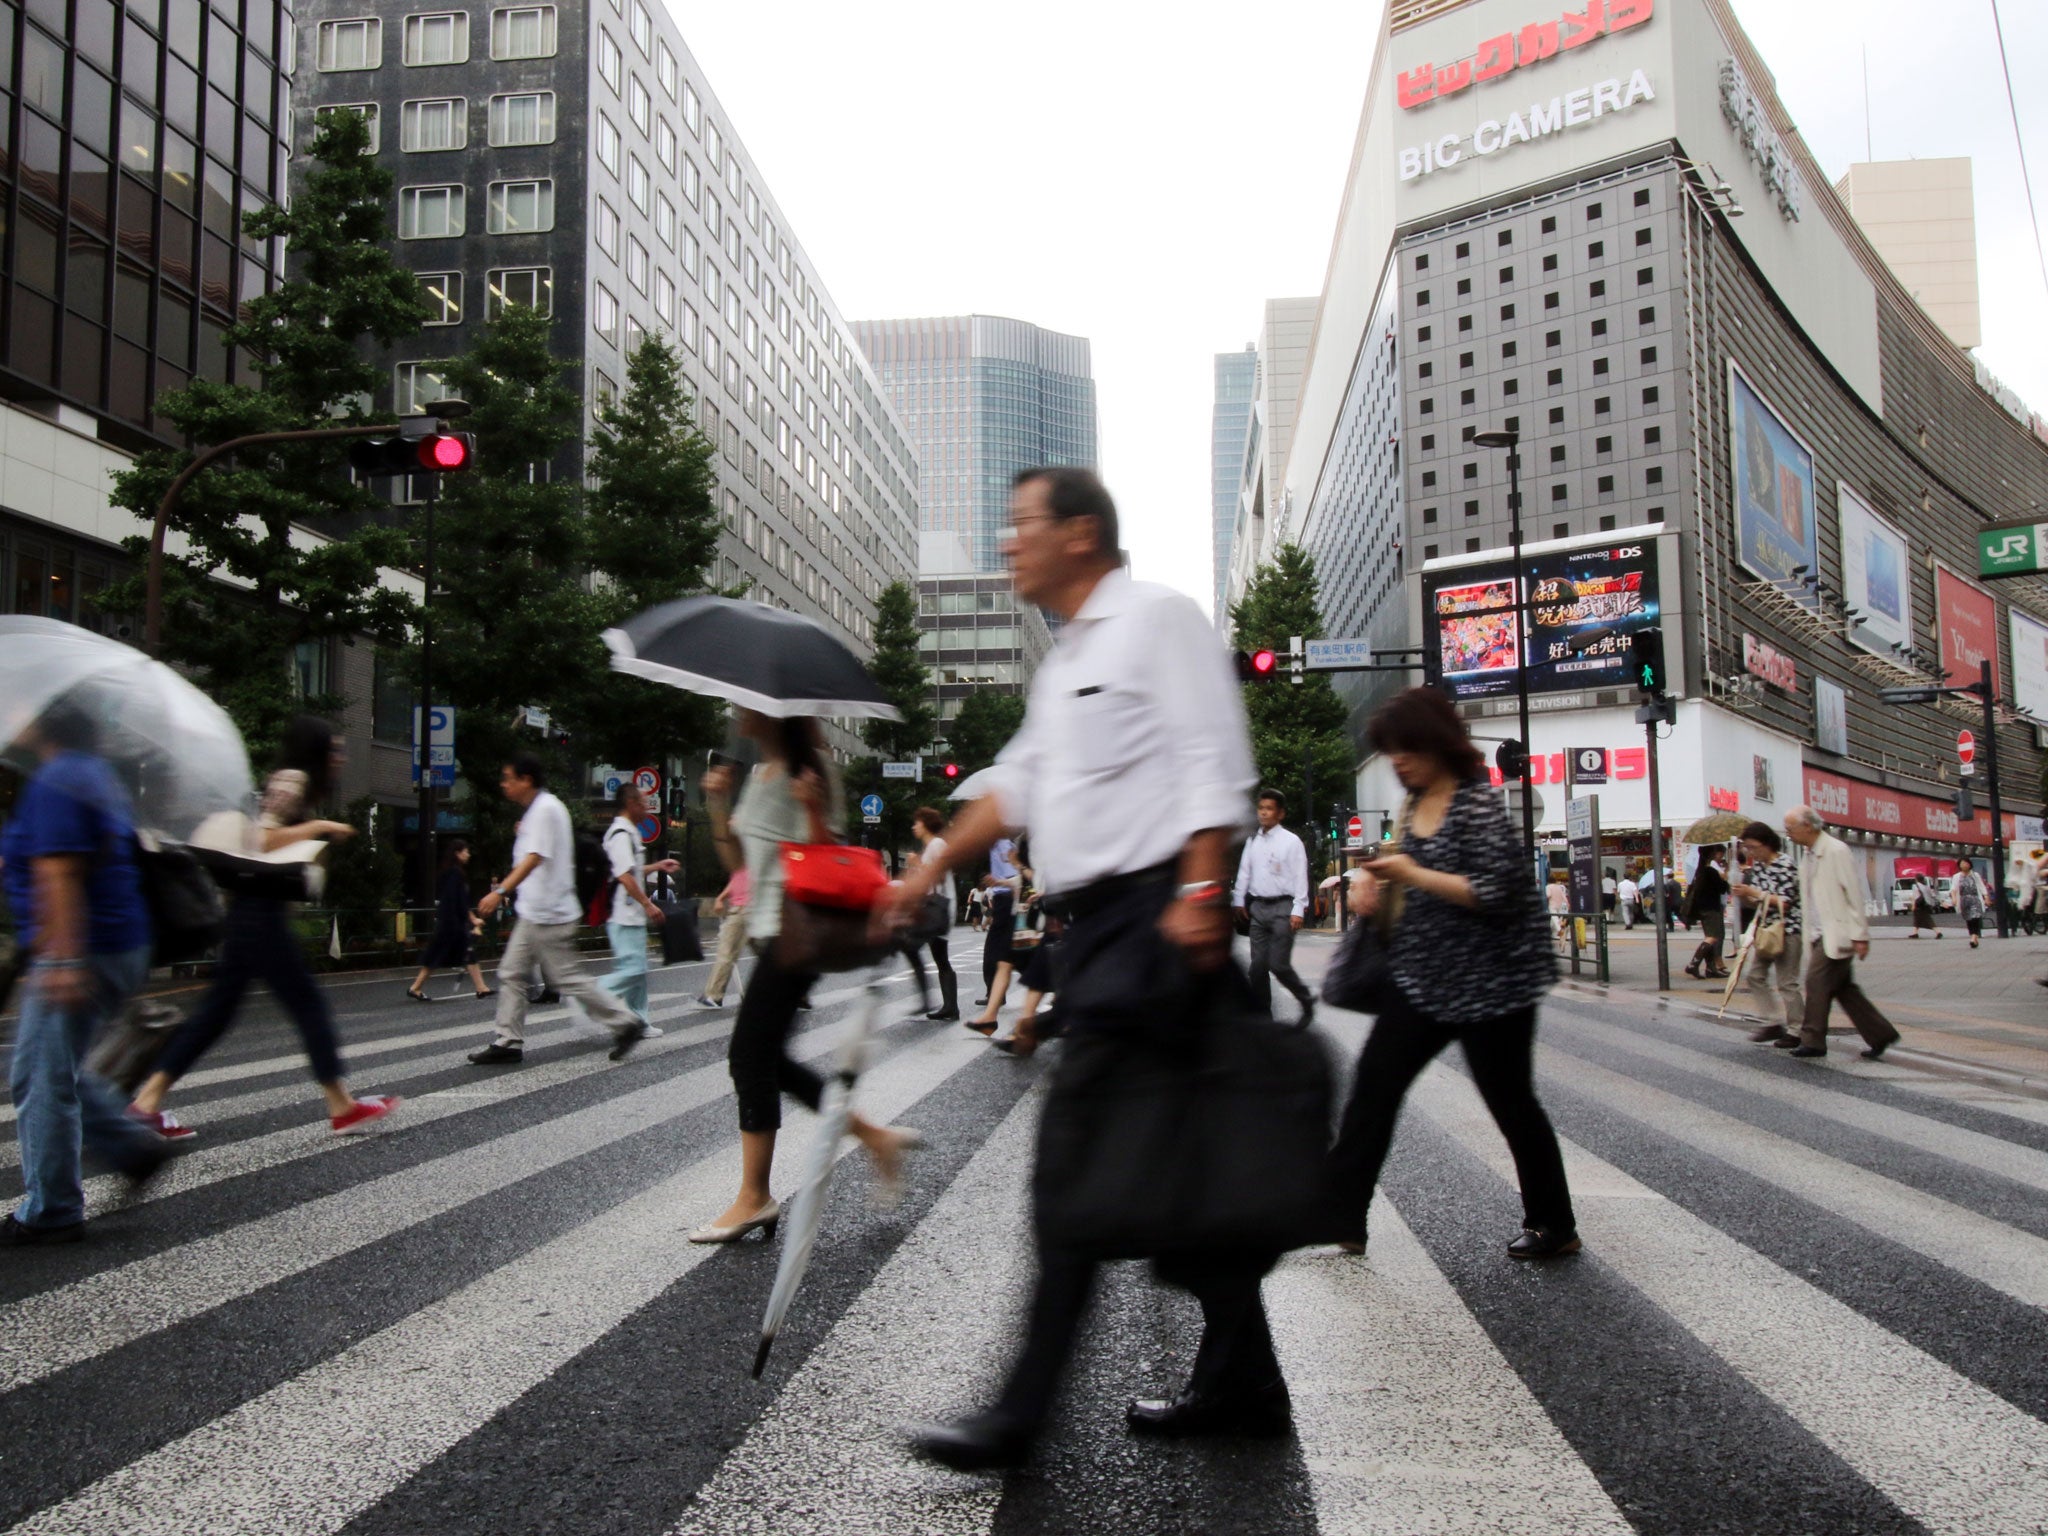 More than 20 per cent of Japan's population is over 65